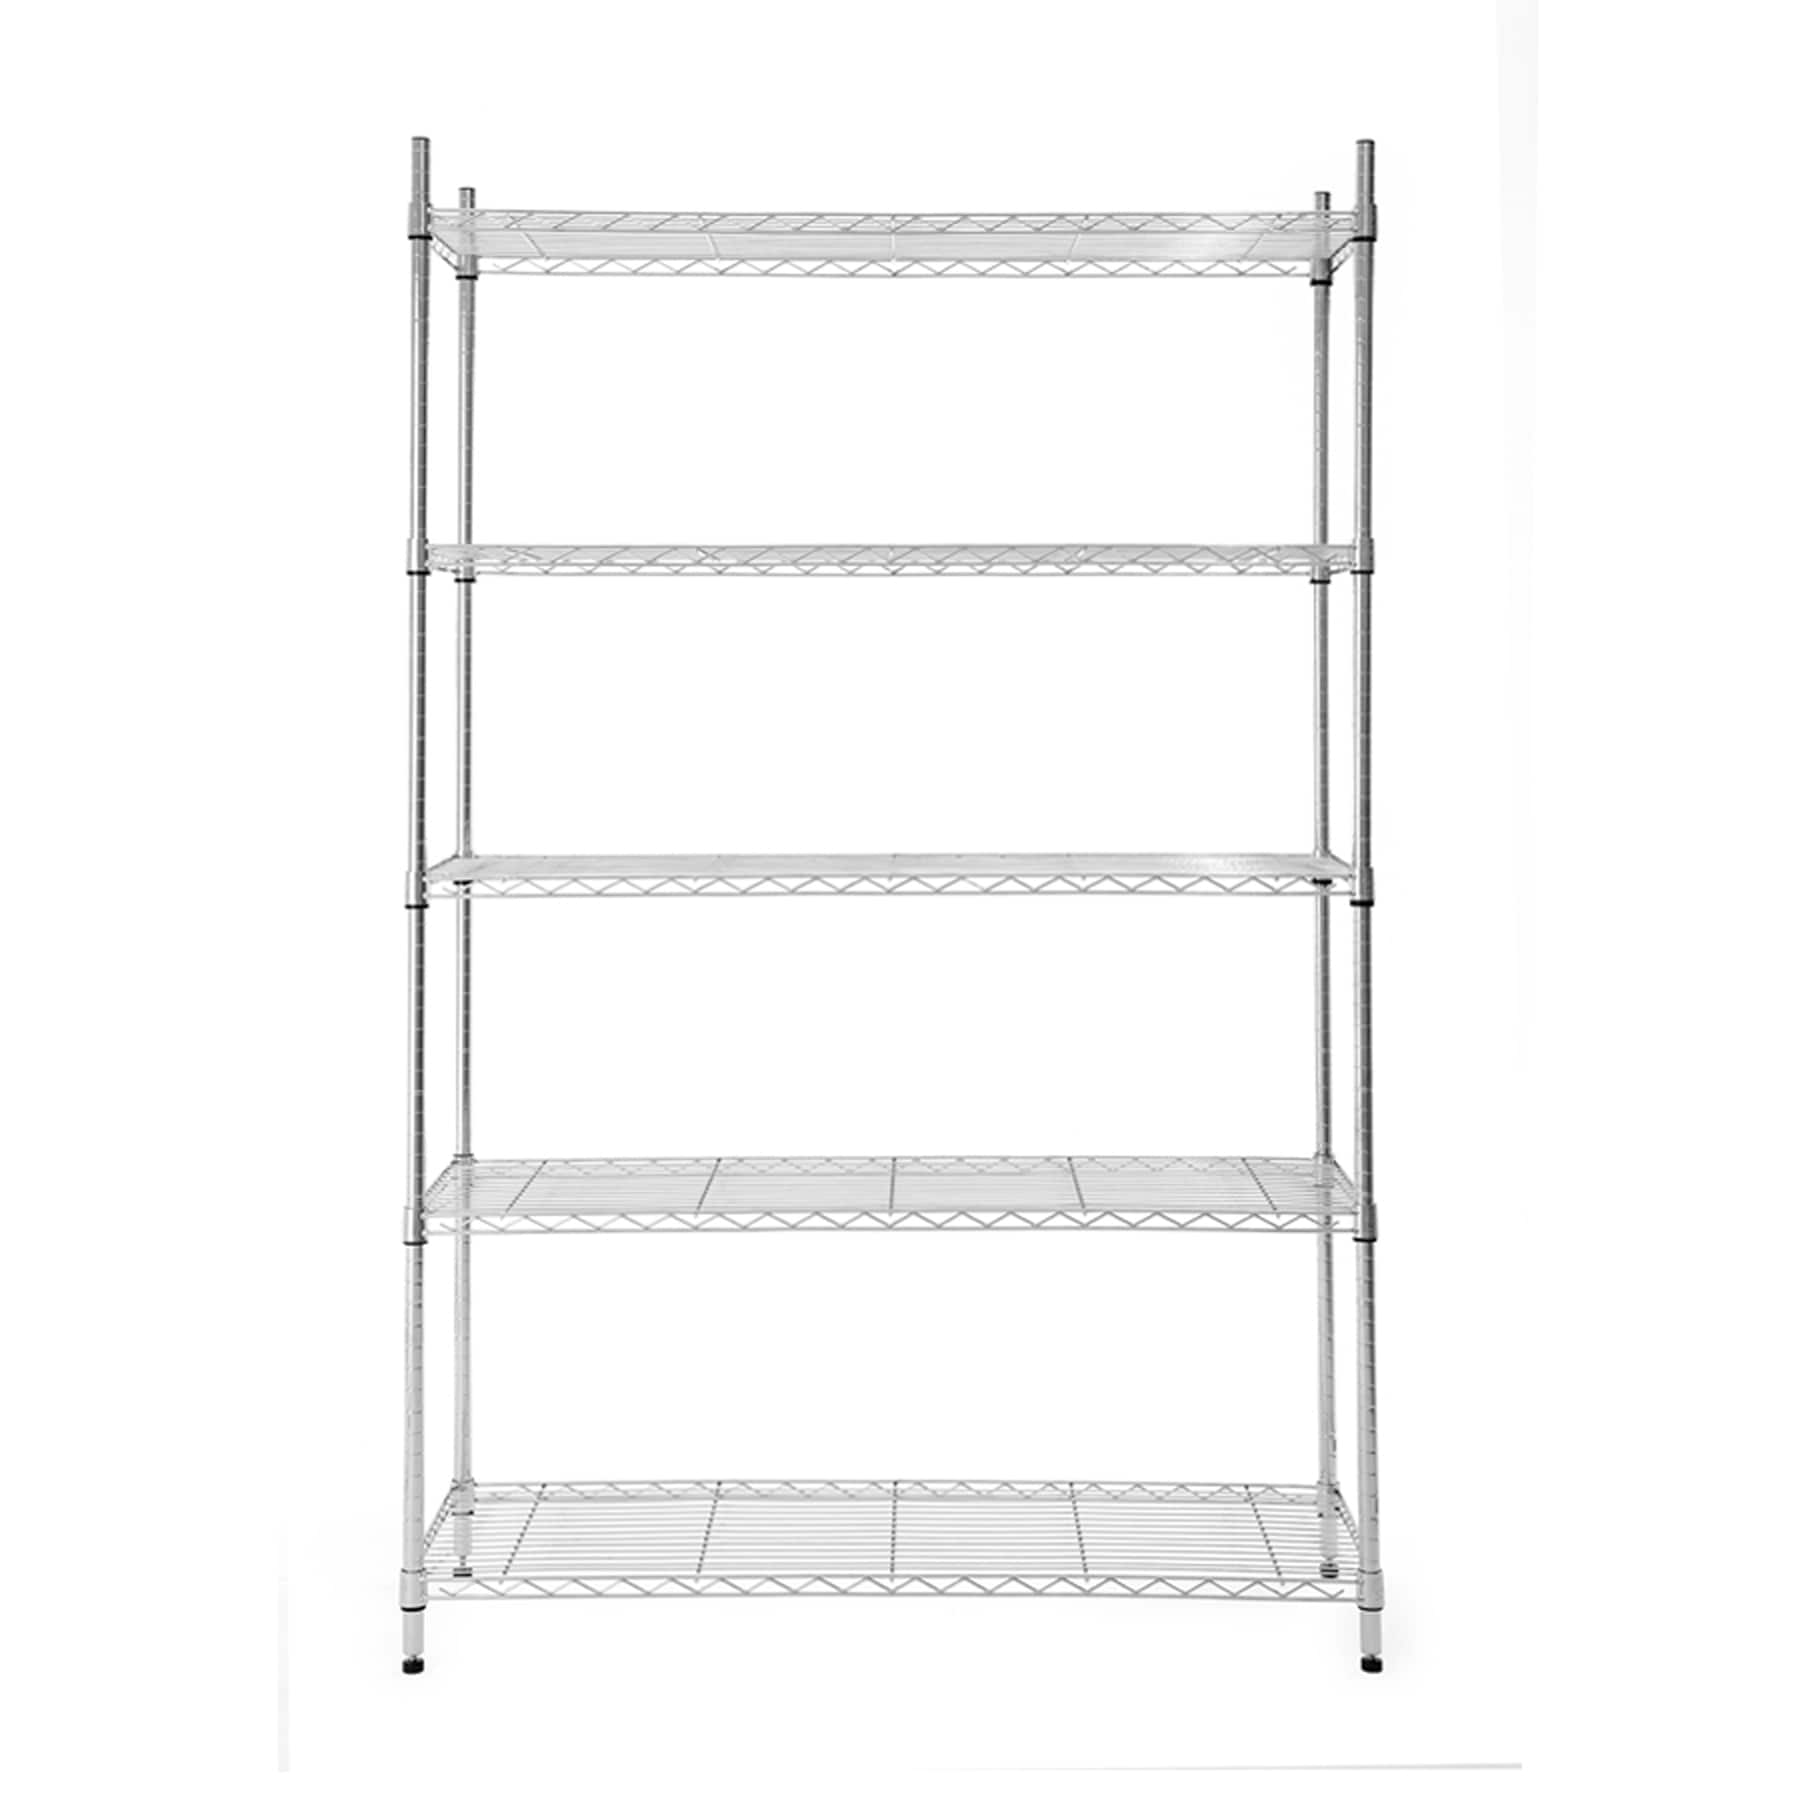 4-Way Chrome J Hook Rack for Clothes